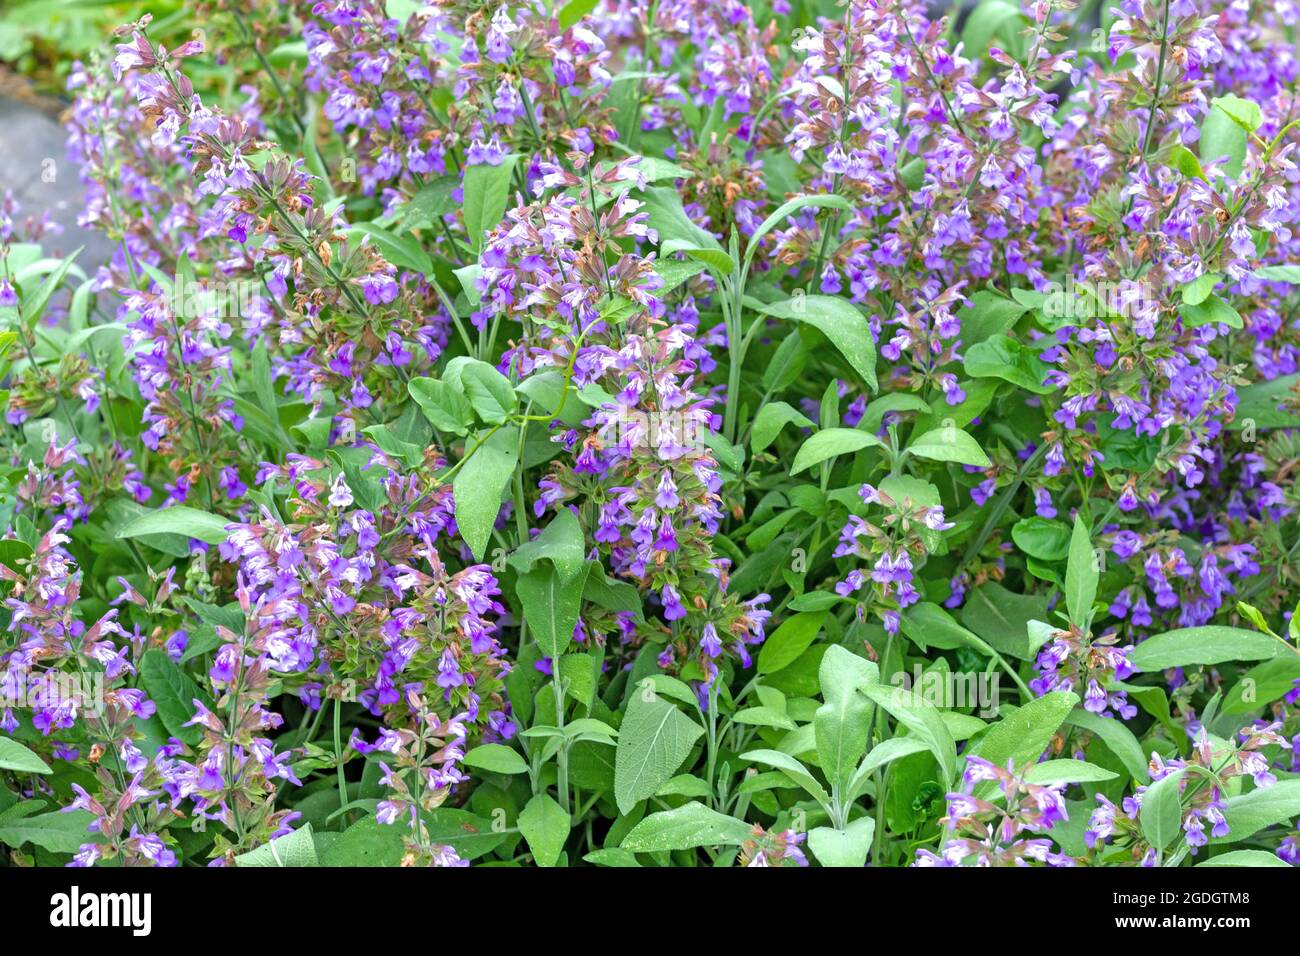 Sage plant (Salvia officinalis) in flower in a greenhouse. Stock Photo